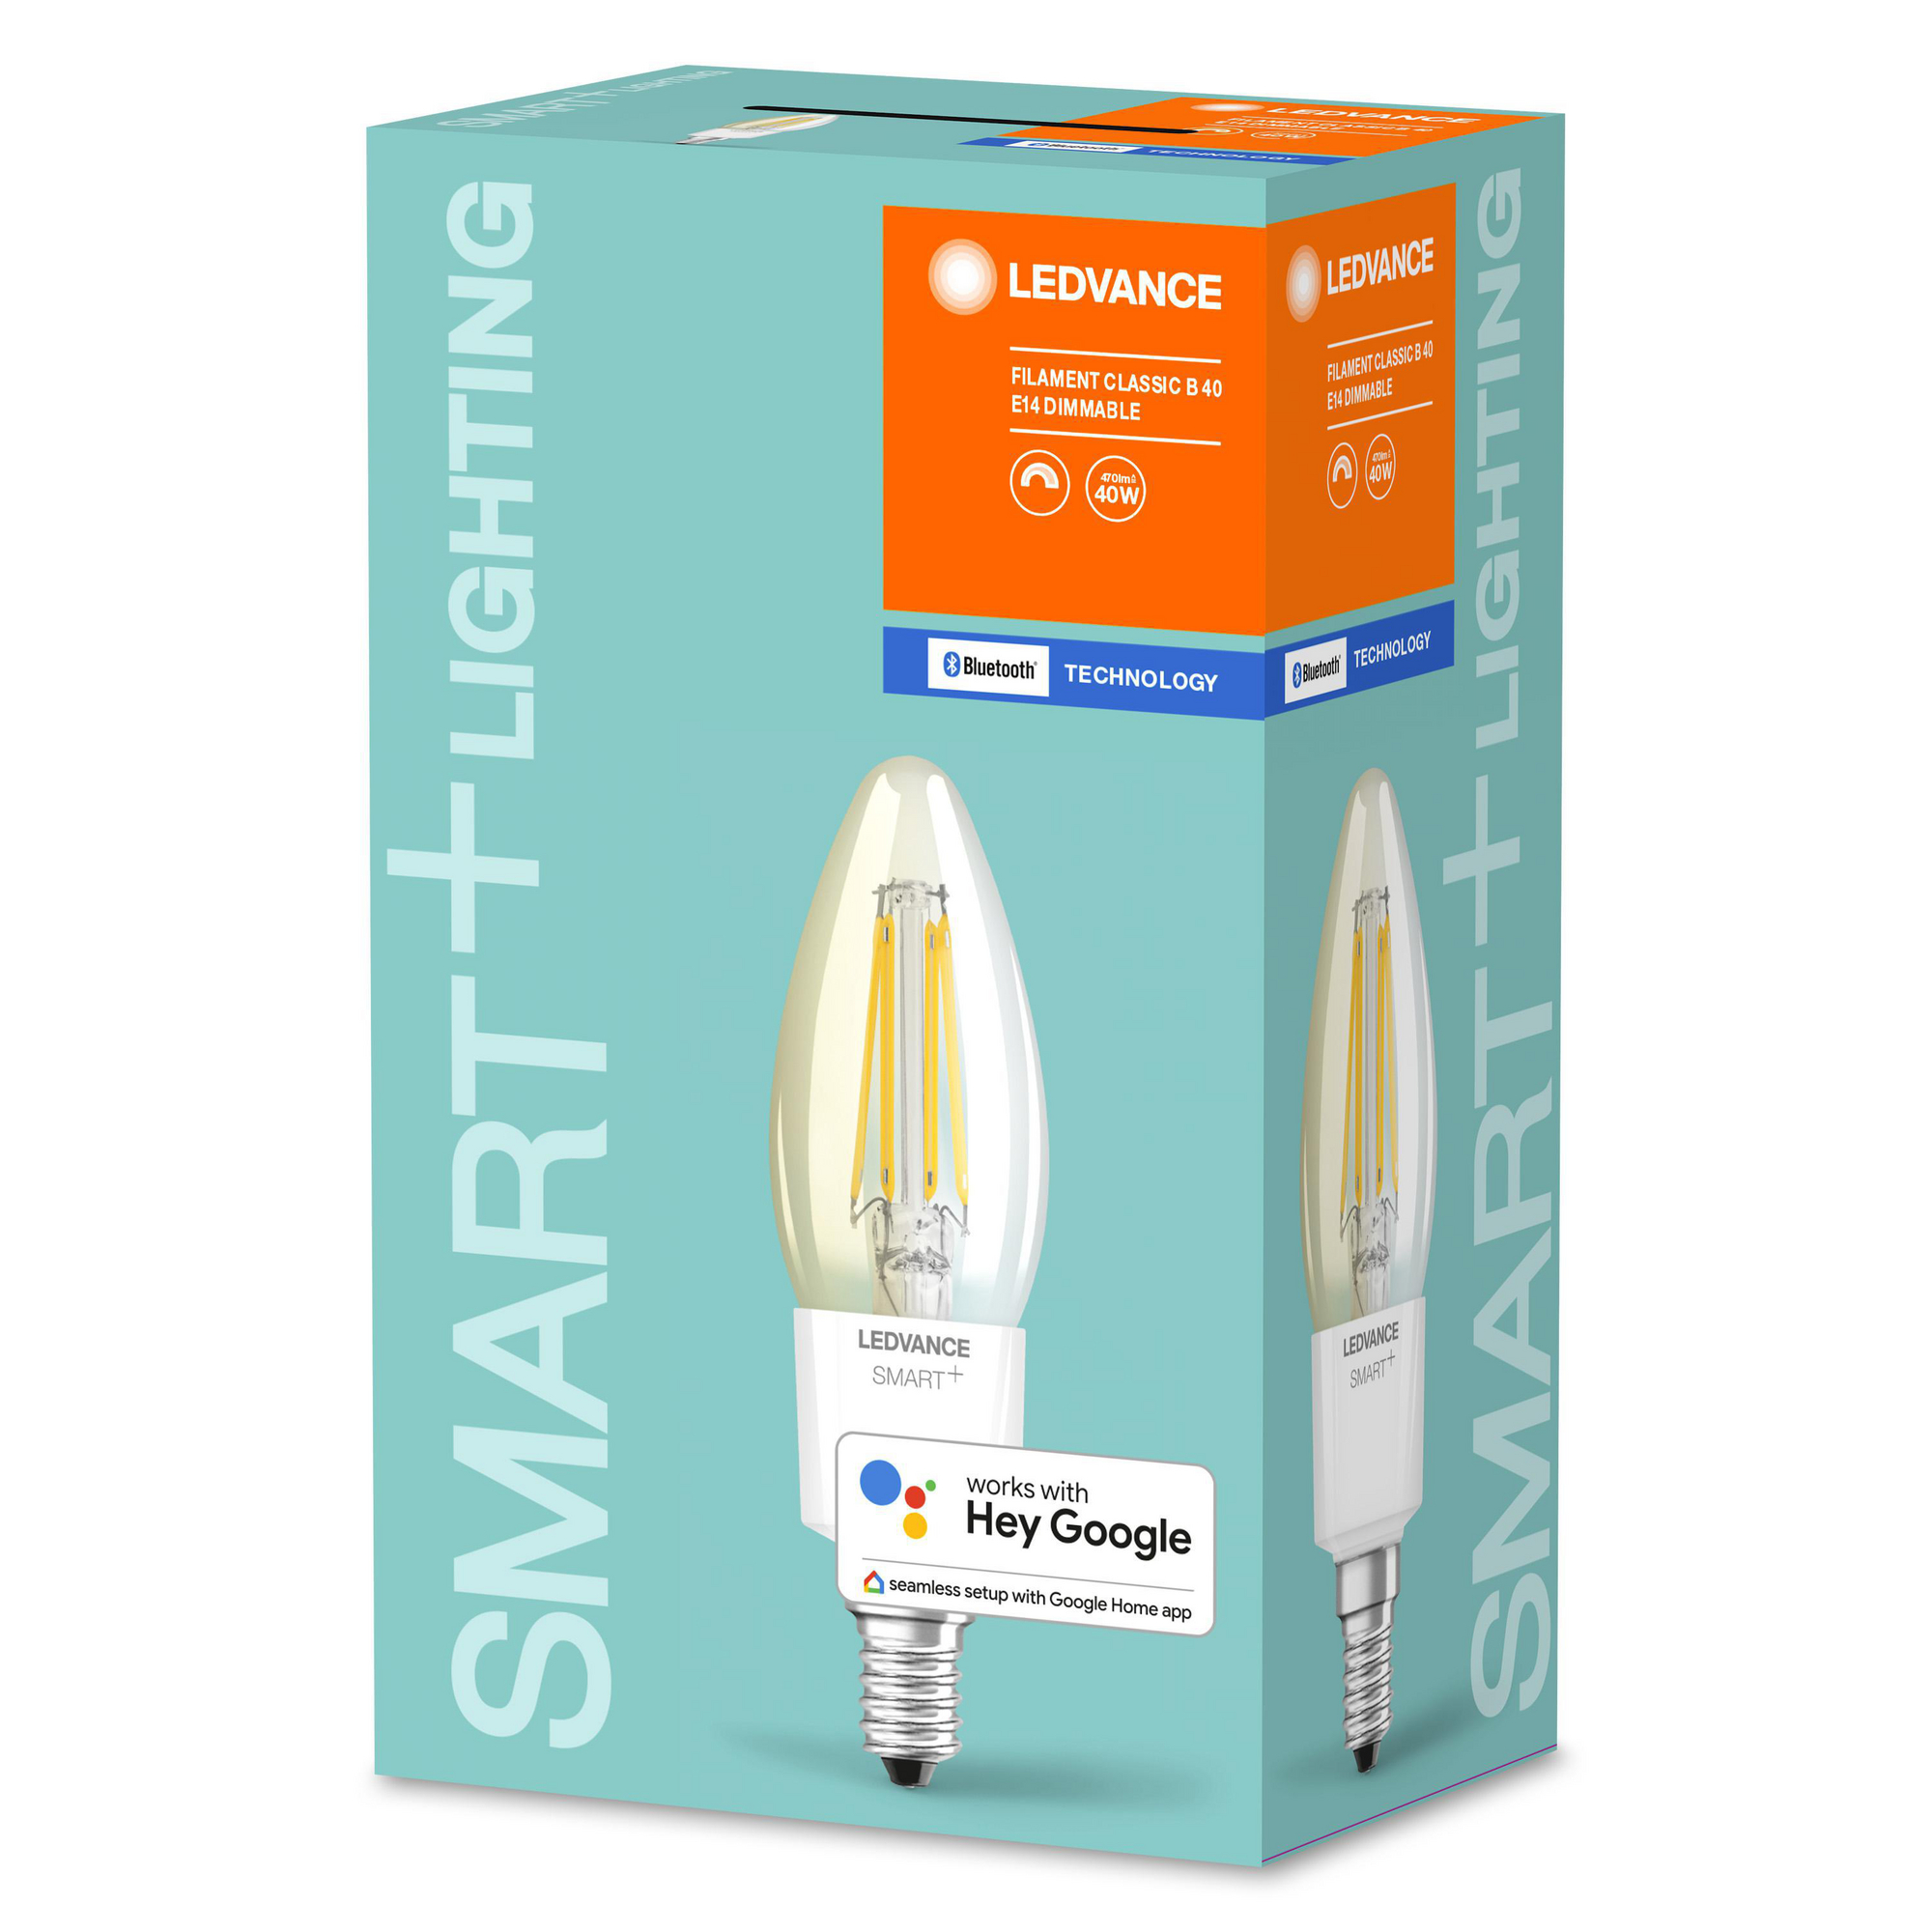 LED-Lampe 'Smart+' 11,8 cm 470 lm 4 W E14 weiß Bluetooth dimmbar + product picture